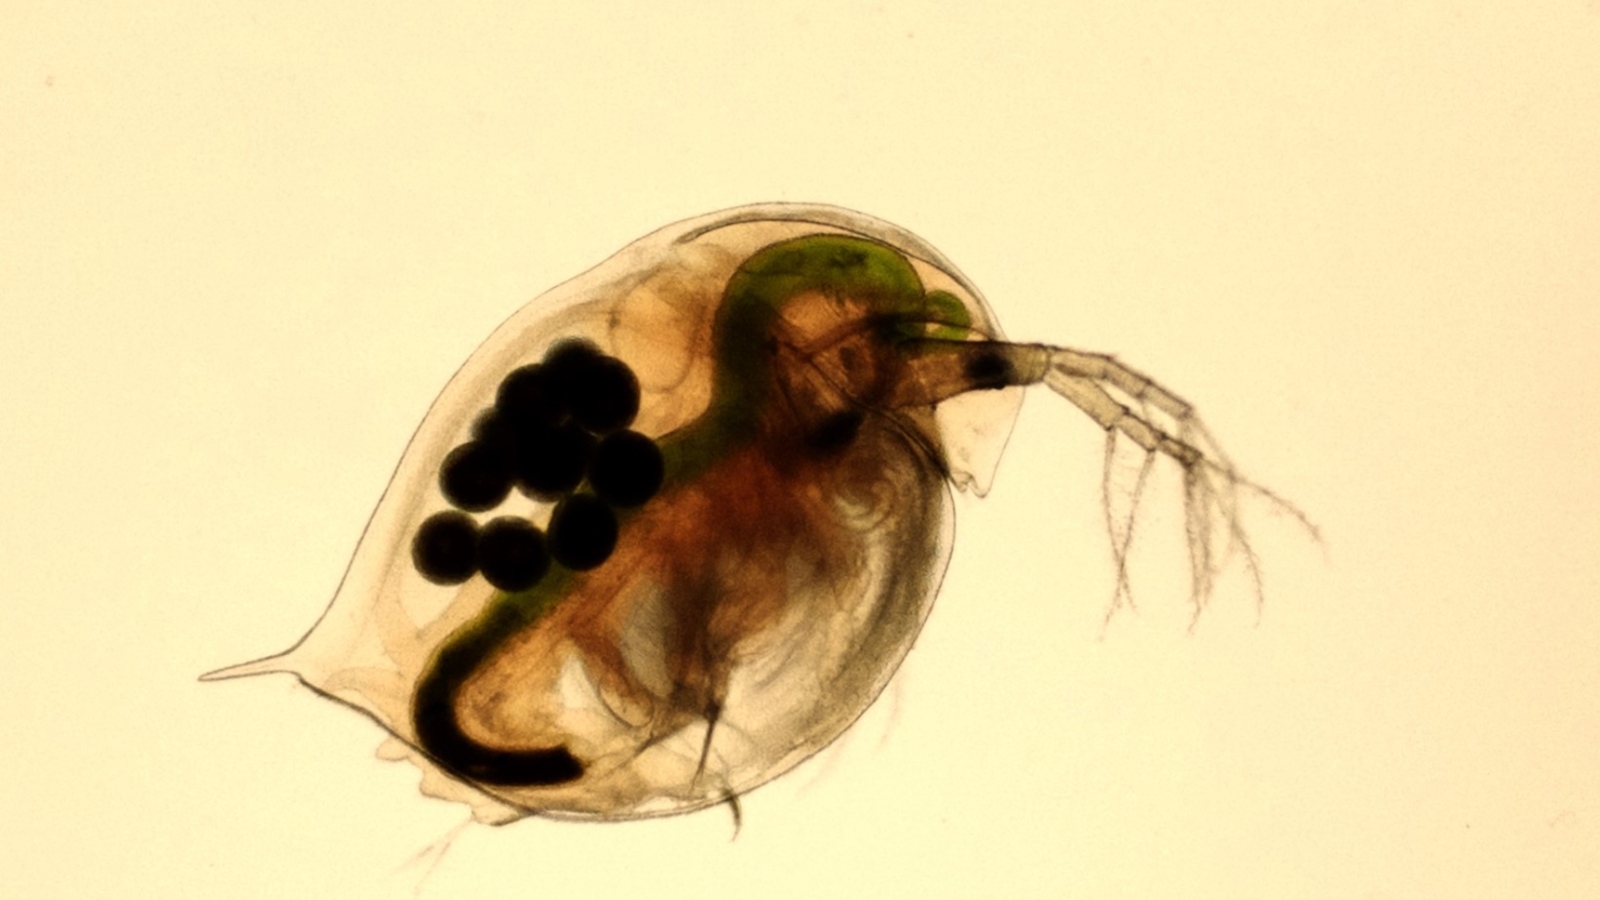 Daphnia magna, a species of water flea, adapted to become better able to survive exposure to ultraviolet-filtering chemicals found in sunscreen, according to a three-month study that looked at five generations of the fleas. (Photo: Supplied)